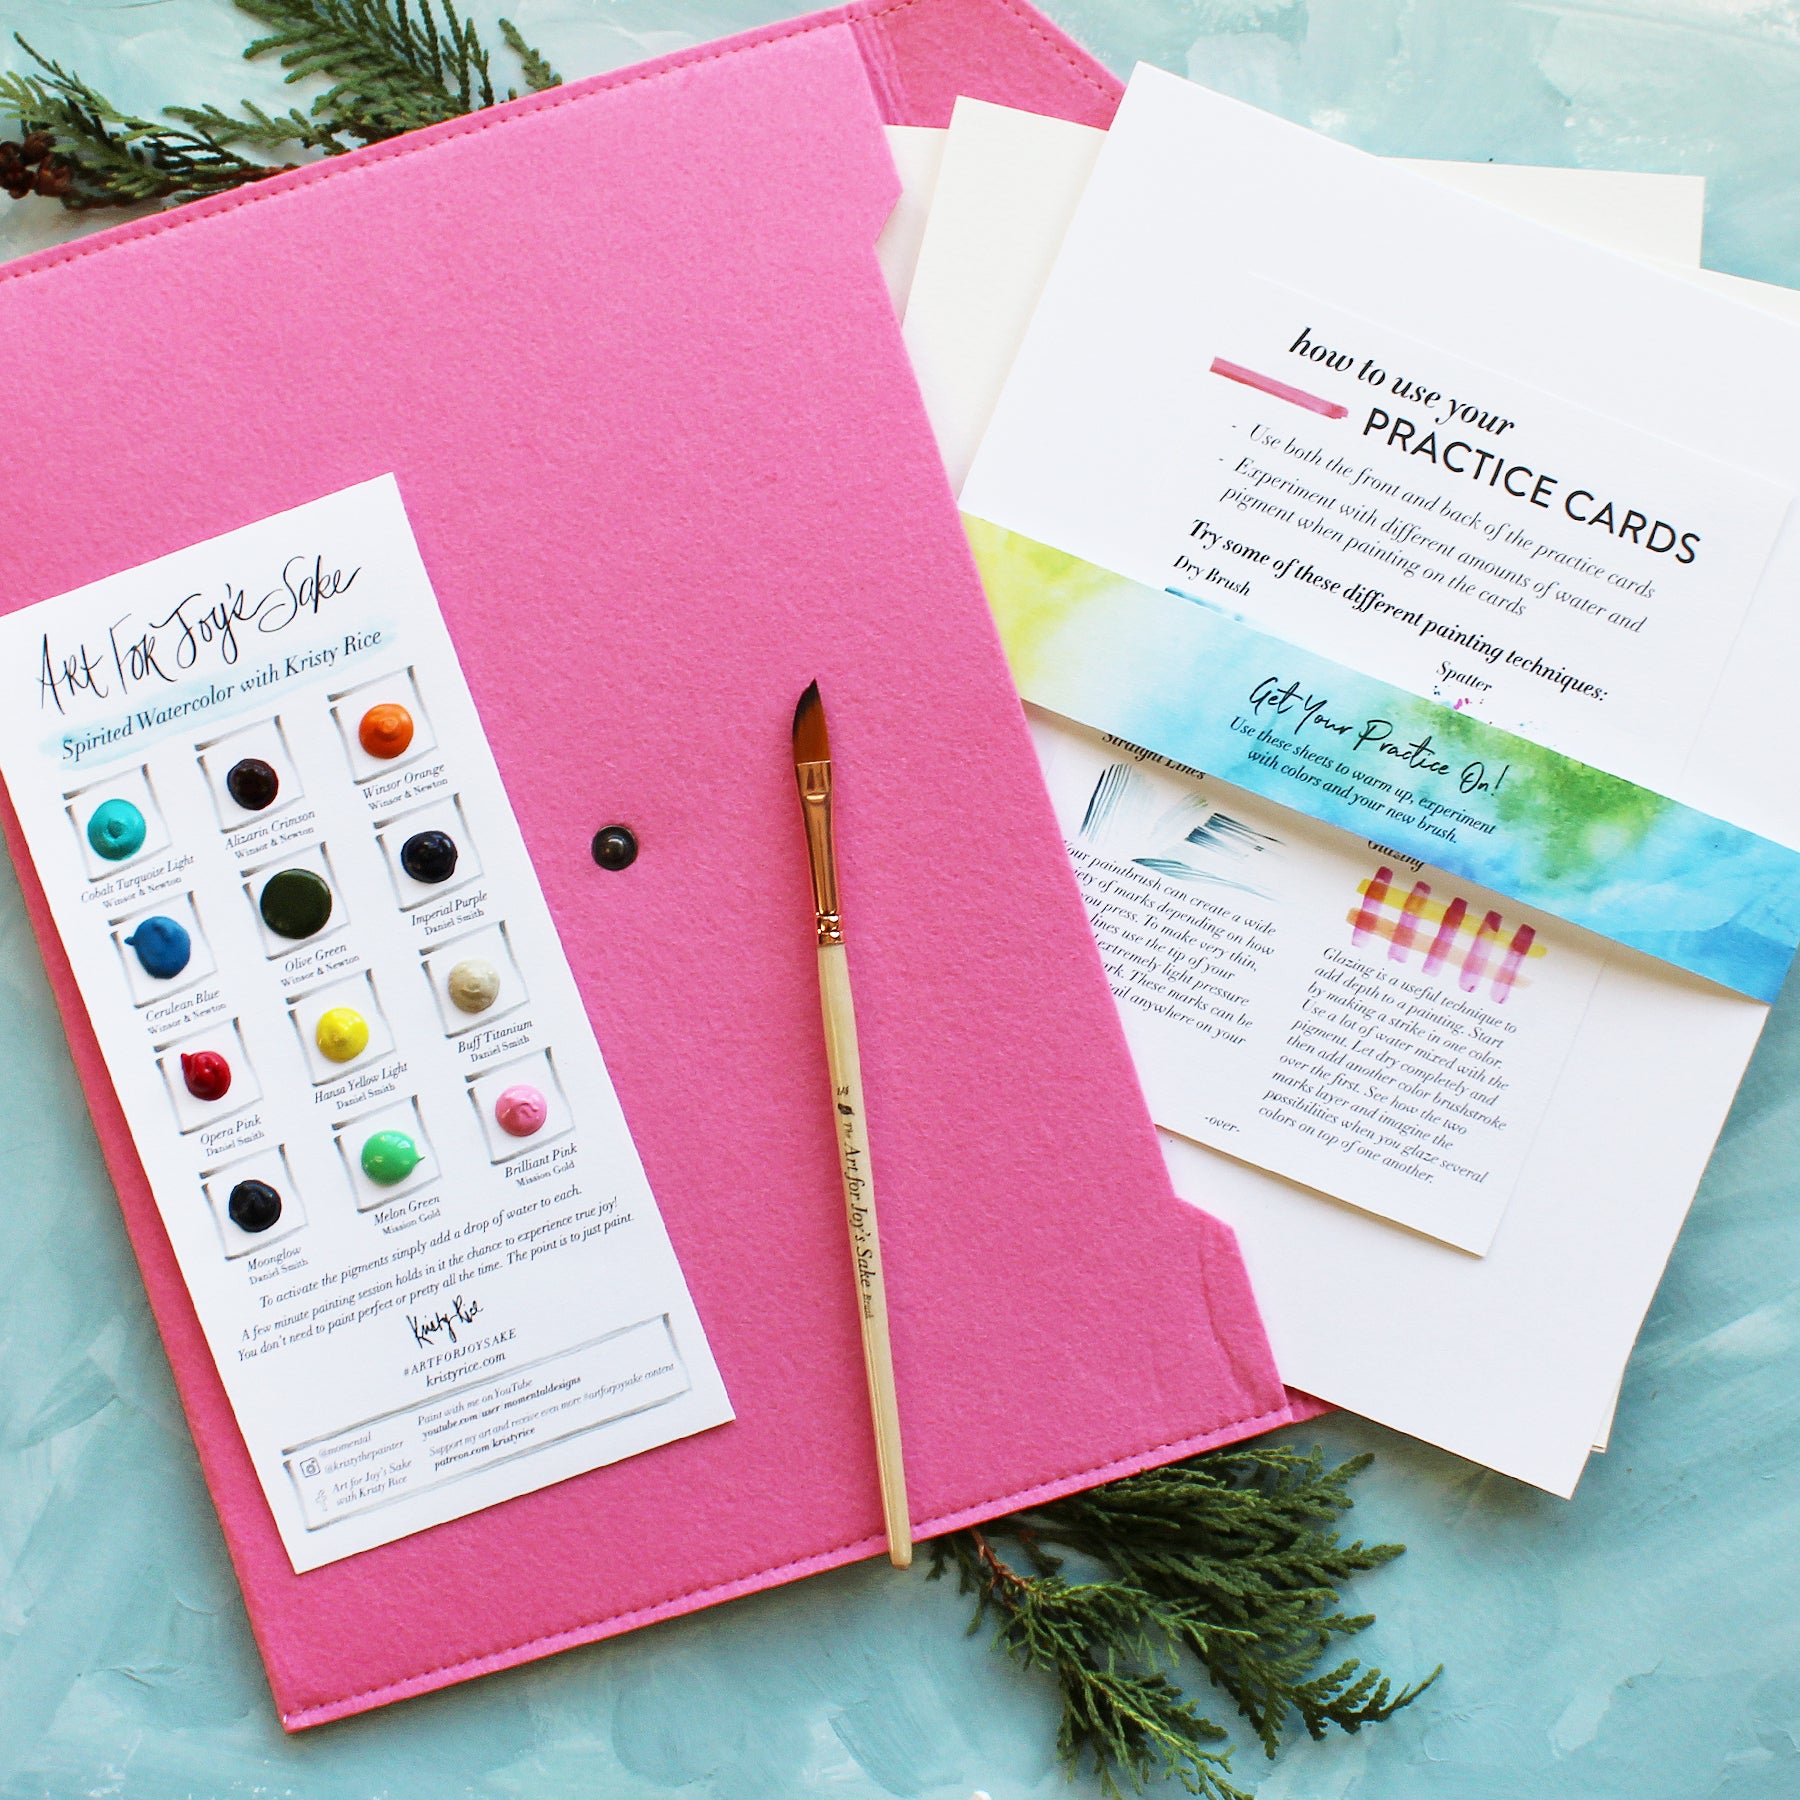 The Watercolor Curious Kit - Unique Shopping for Artistic Gifts